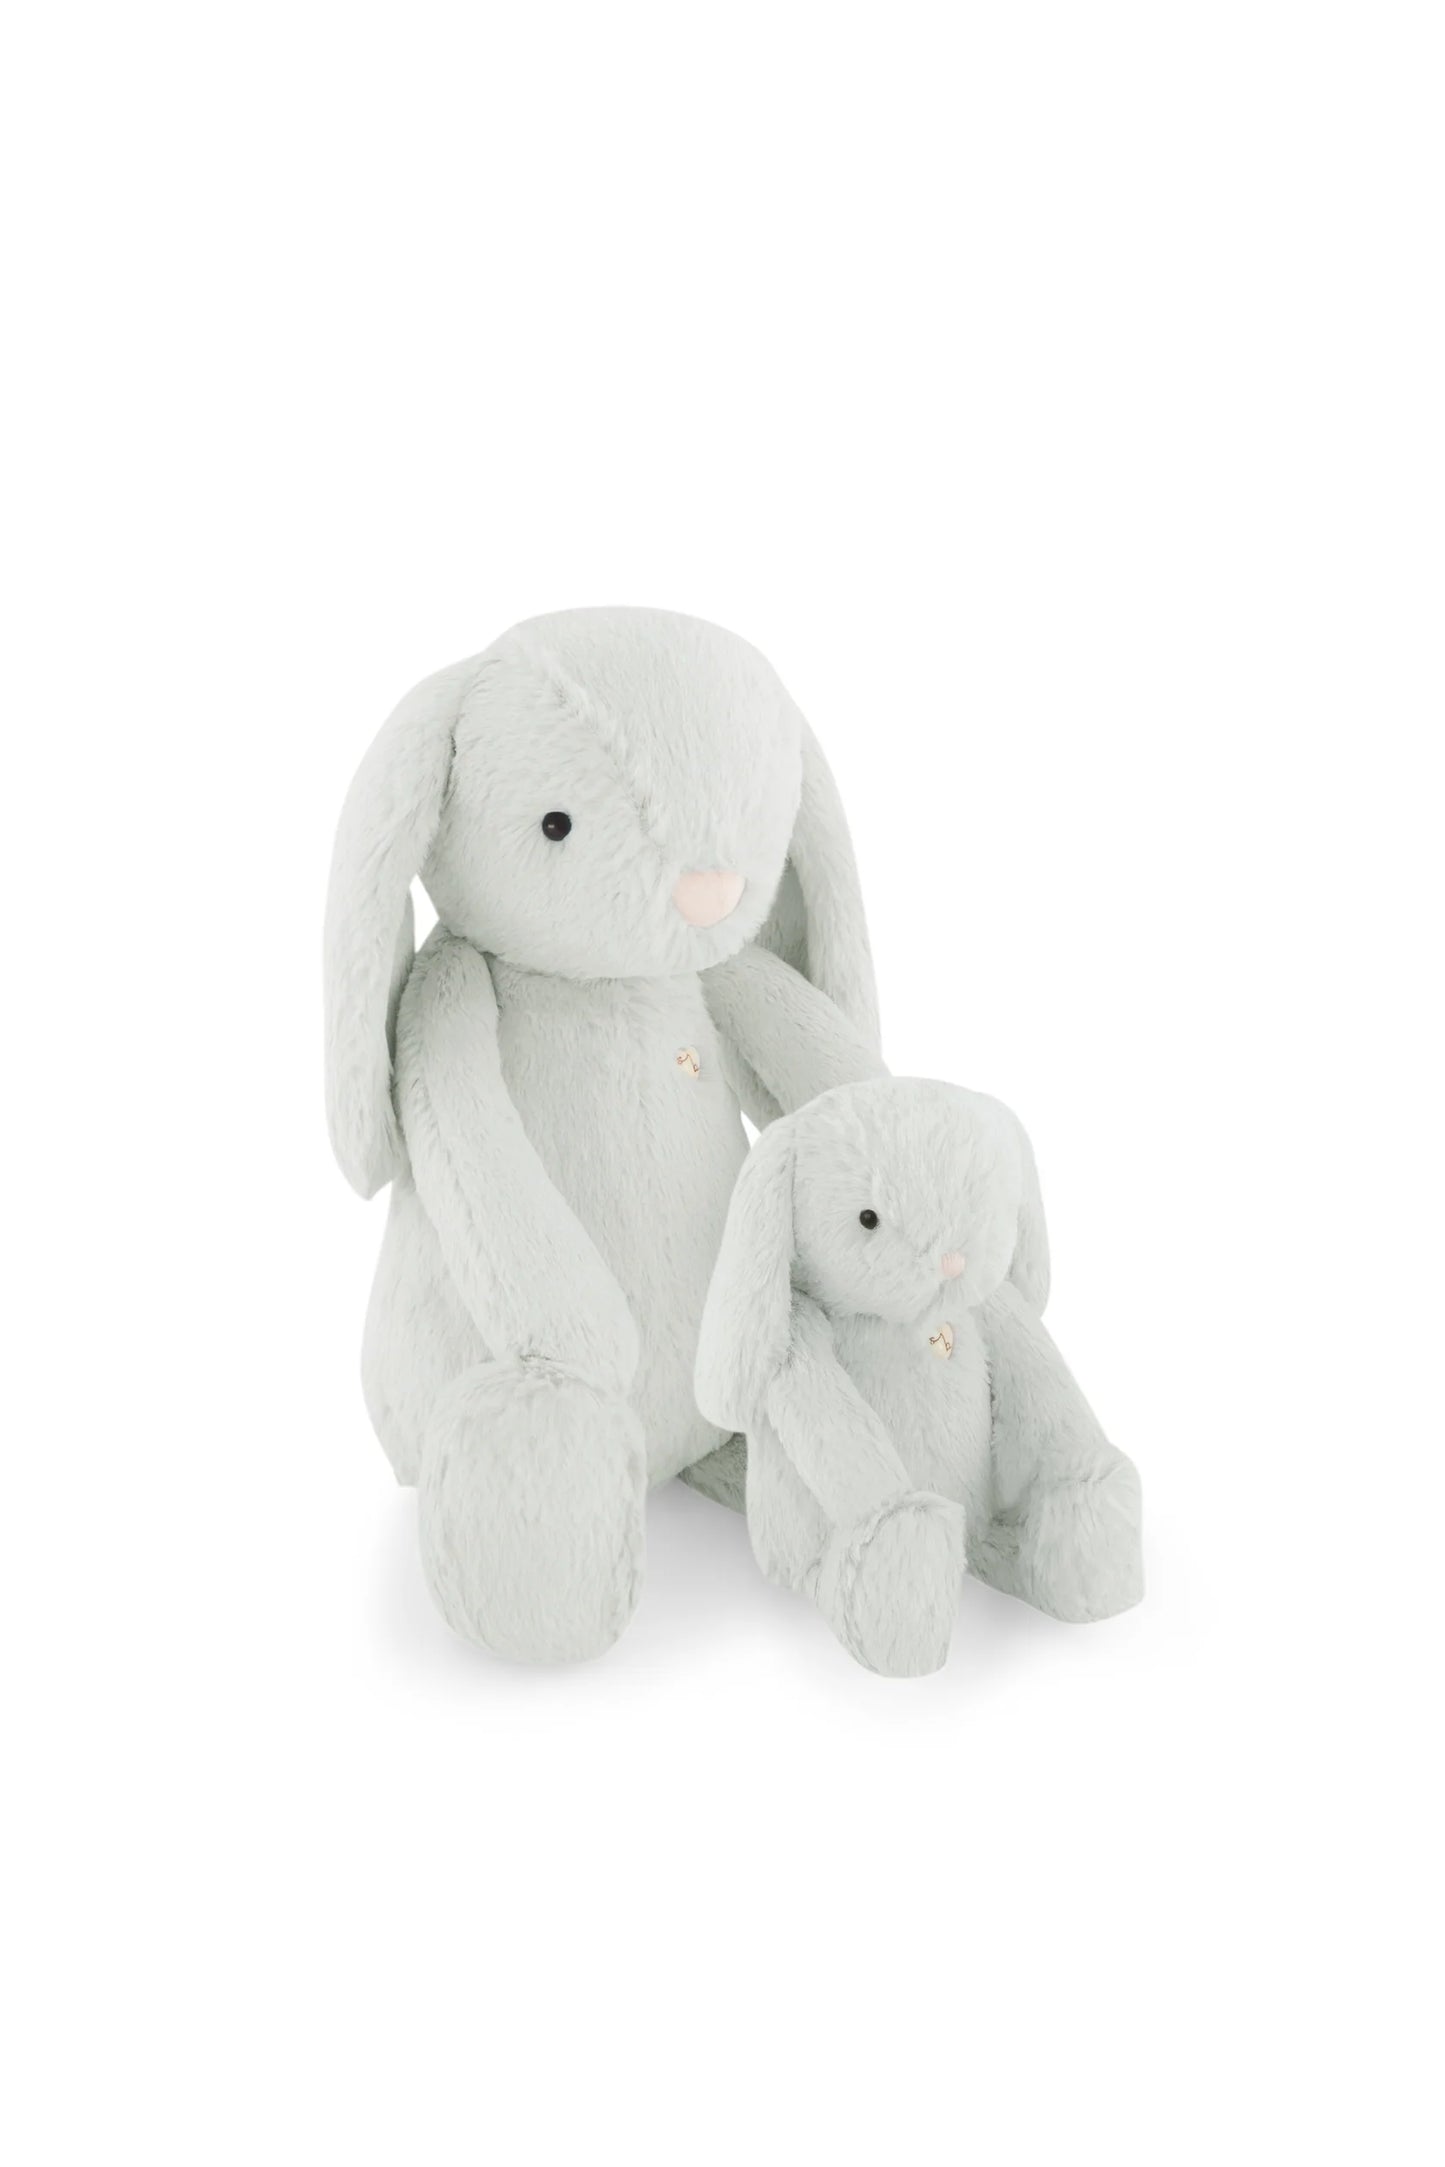 Jamie Kay Snuggle Bunnies  - Penelope the Bunny (Willow - Size Options Available)